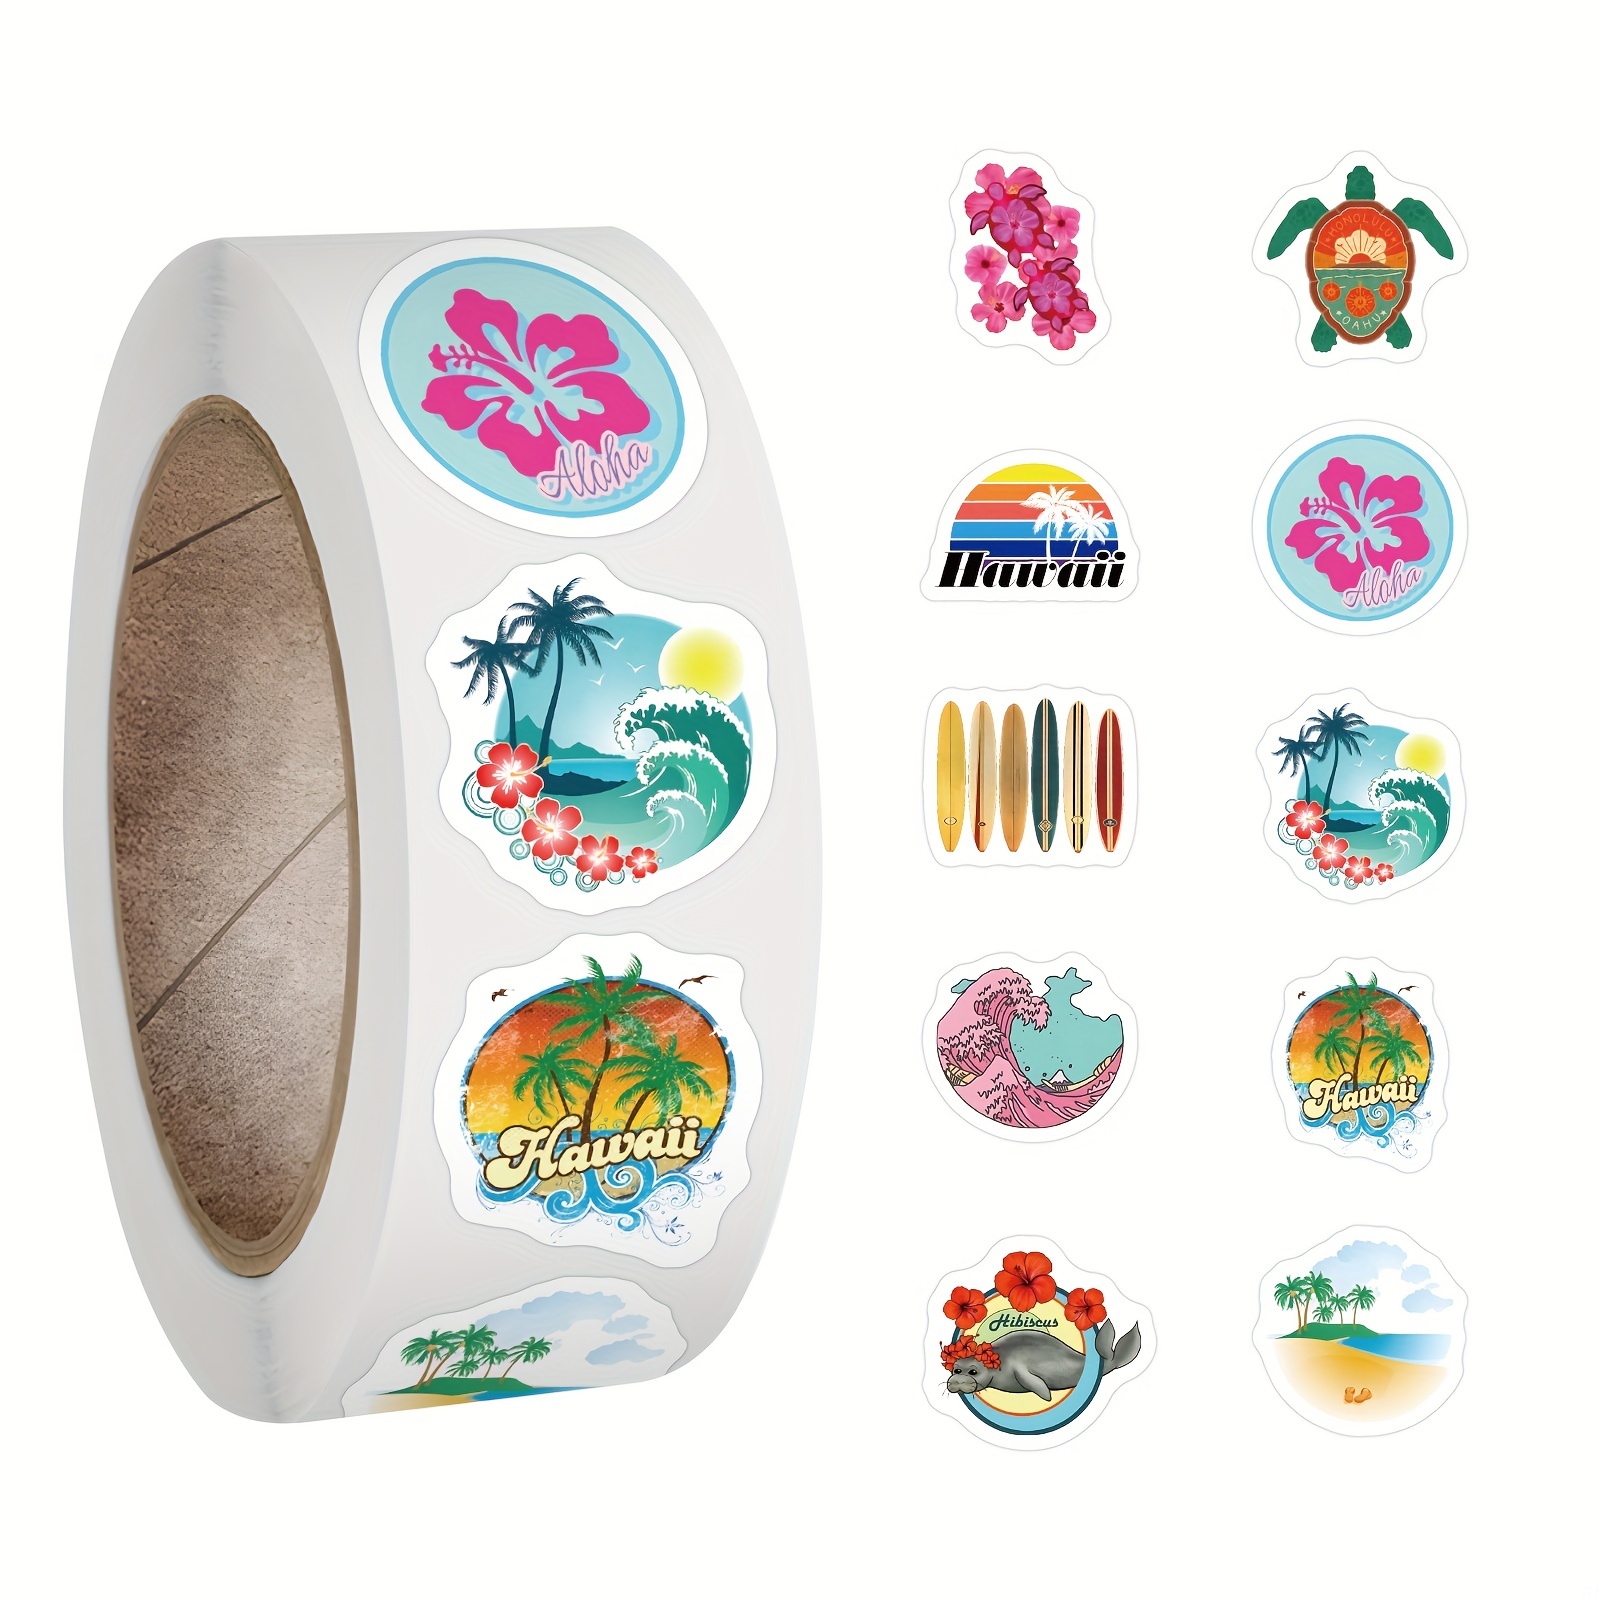 

Hawaii Beach Stickers Roll |500 Pcs Aloha Tropical Vacation Vinyl Decals For Water Bottles Laptop Luggage Cup Mobile Phone Diary Journal Scrapbook Notebook Stationery Decor